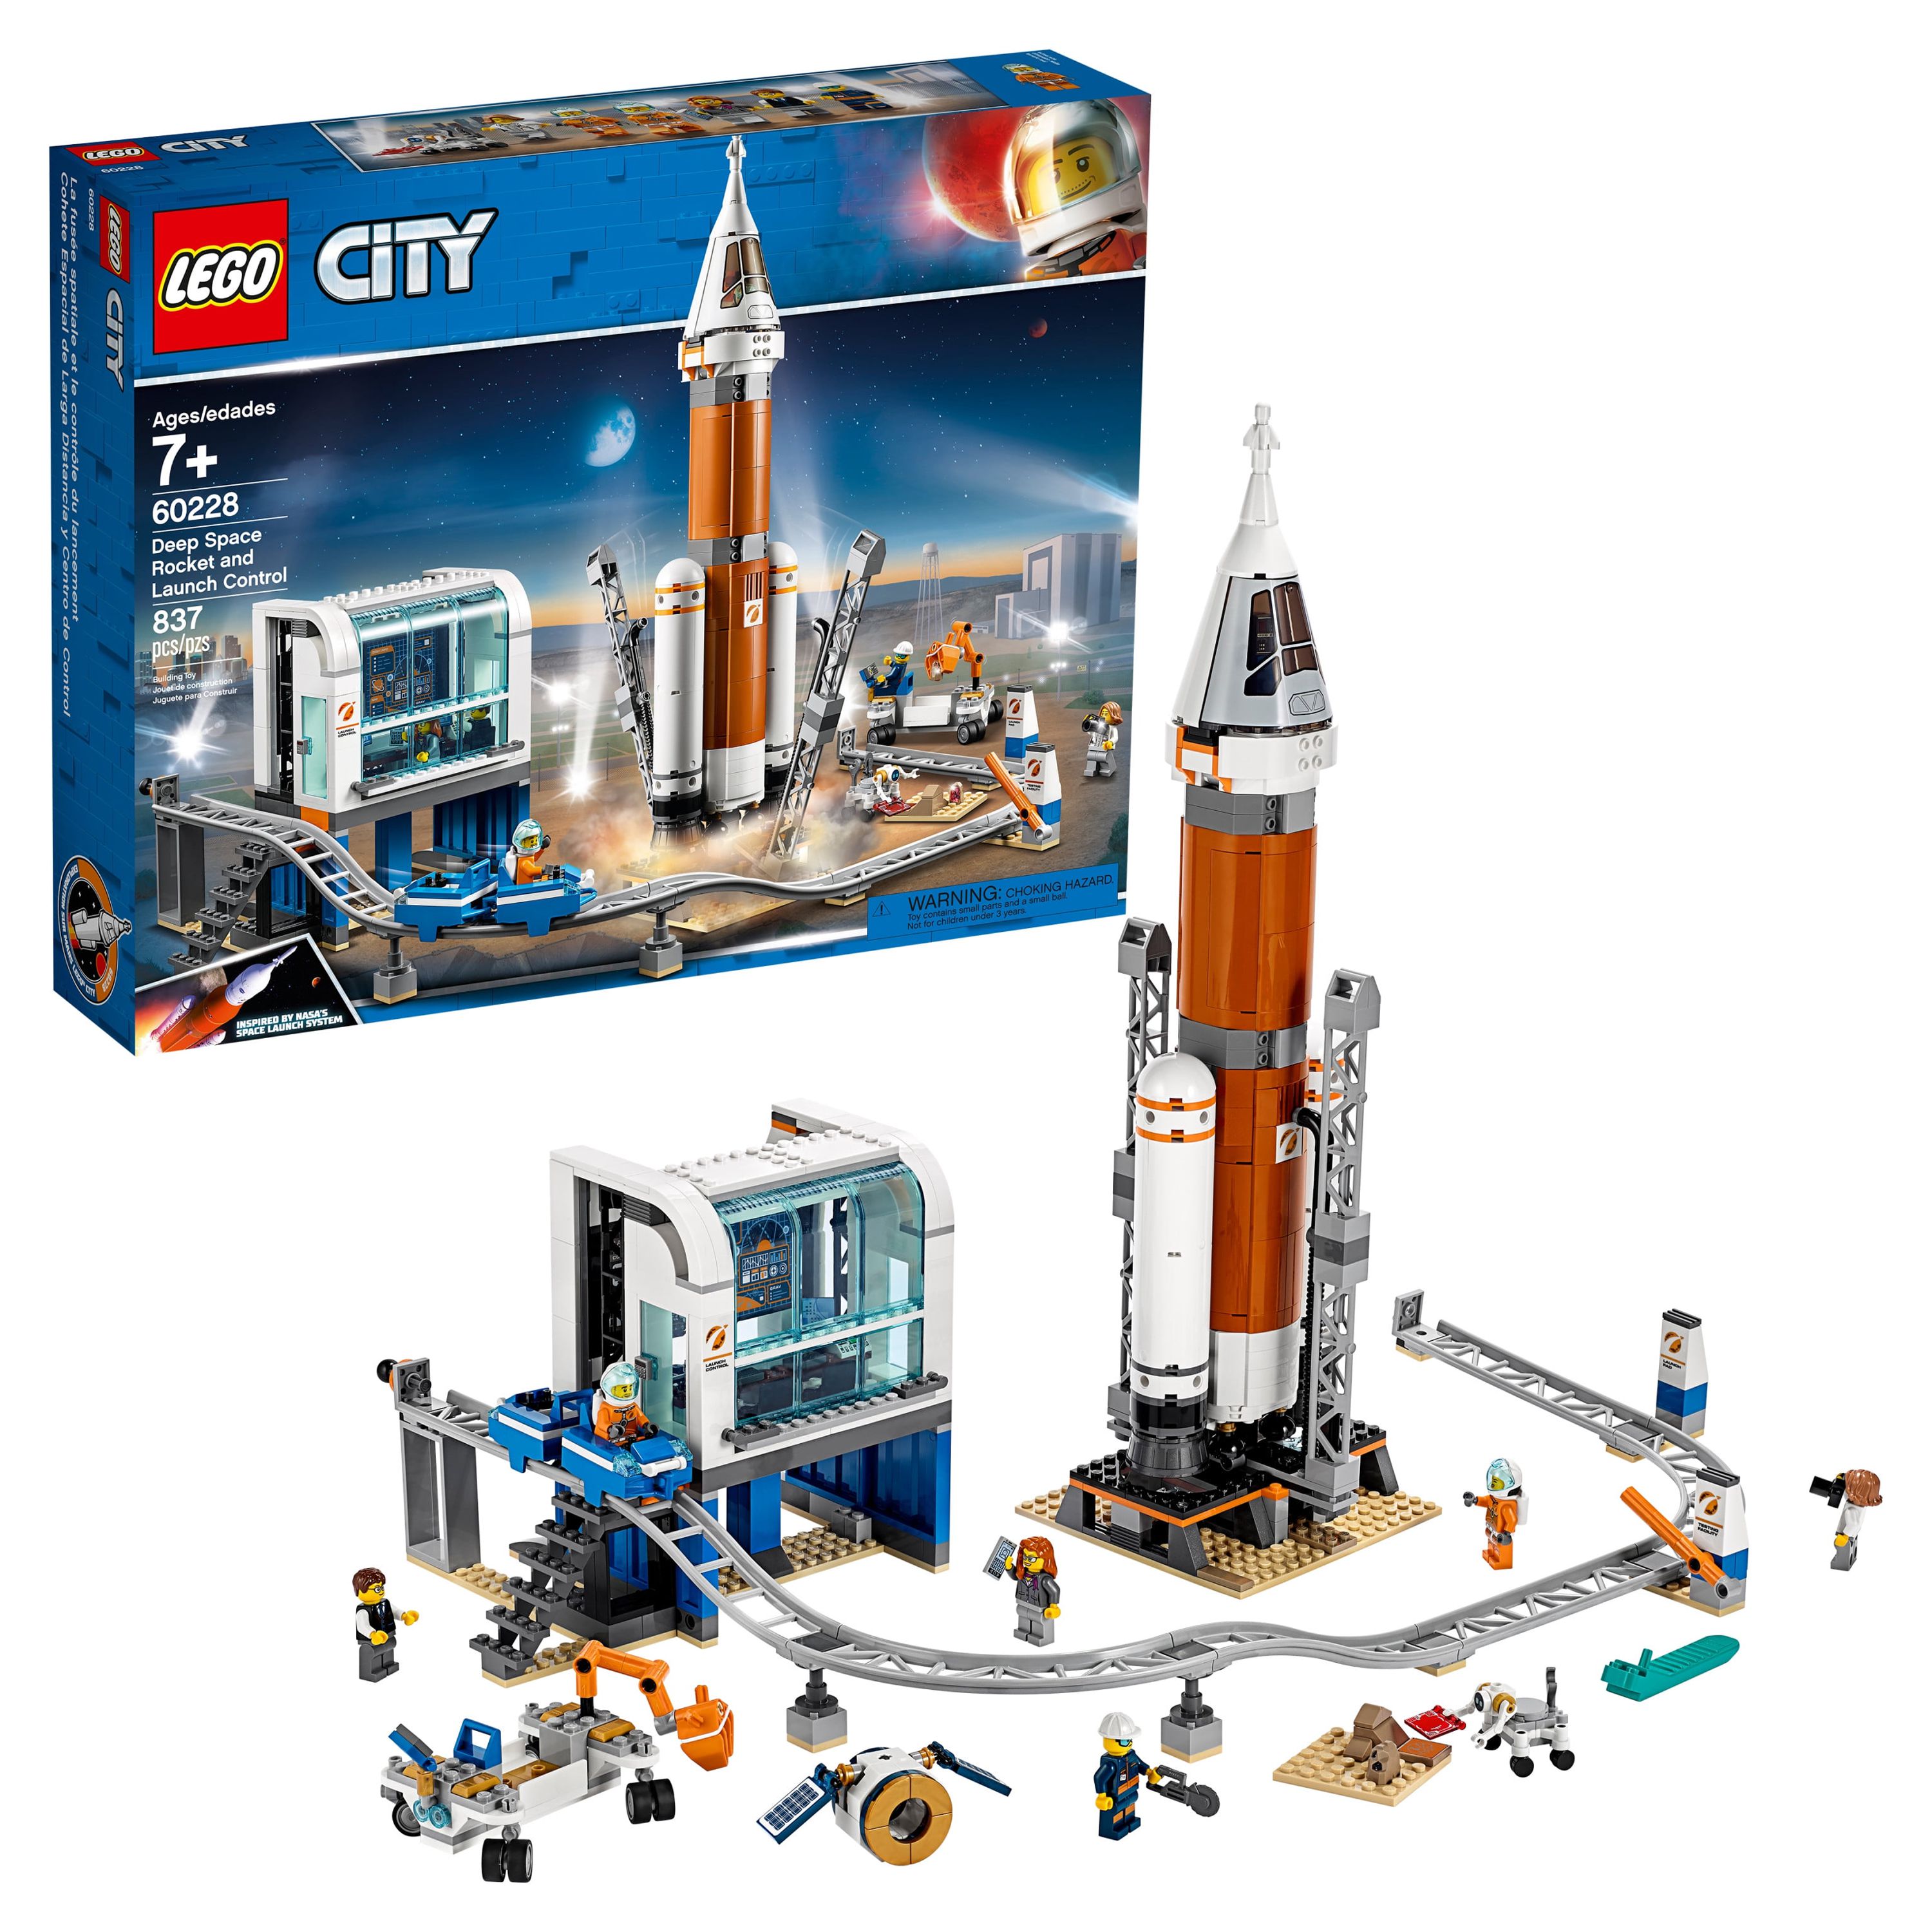 LEGO City Space Deep Space Rocket Launch Control 60228 with Toy Monorail - image 1 of 6